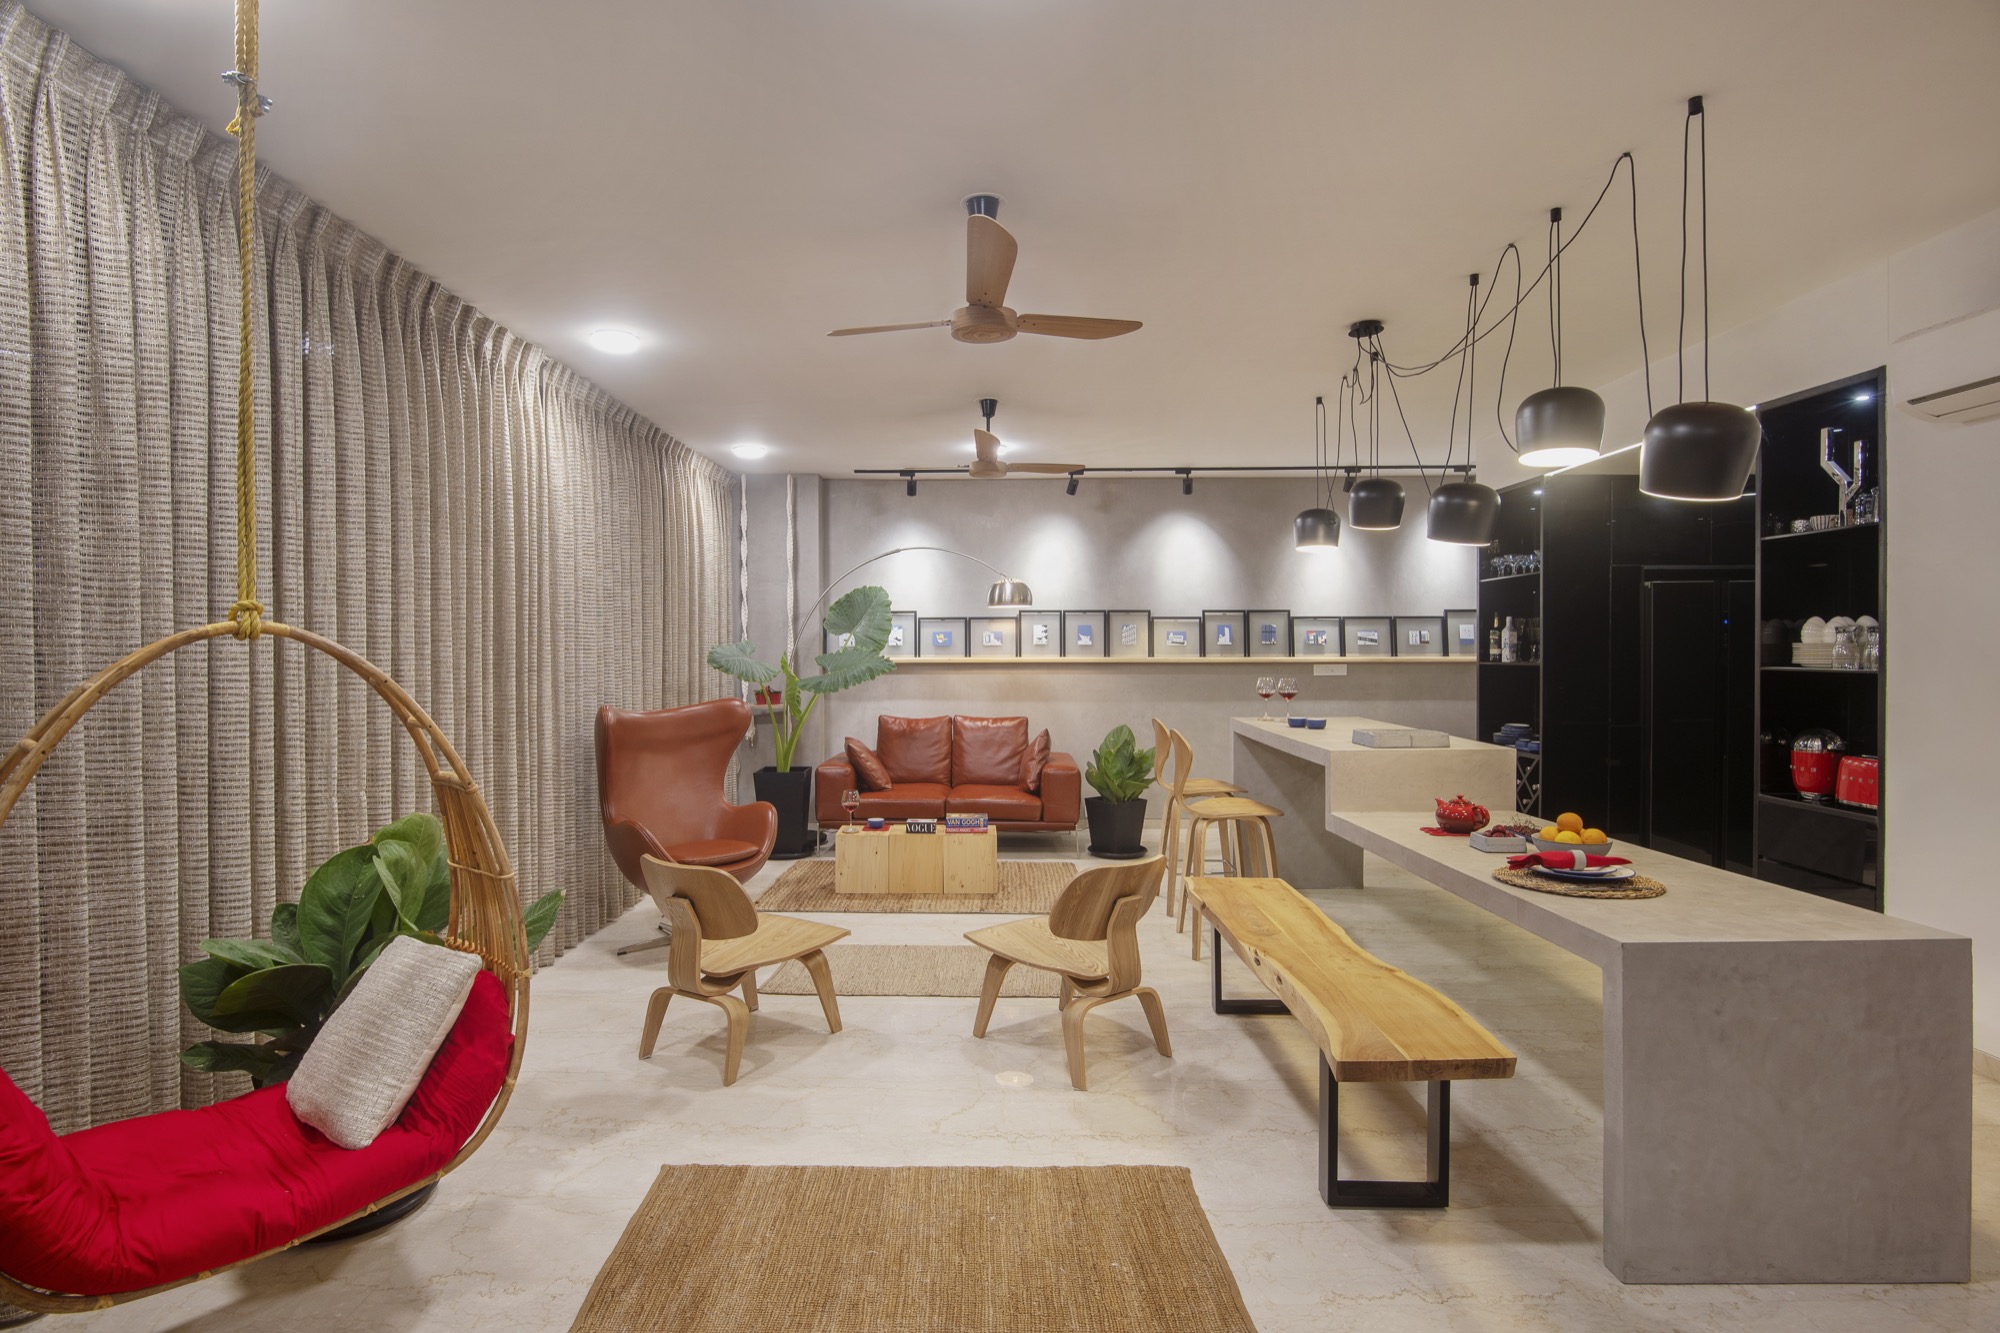 ESQUIRE: Interior Design for a residential Apartment at Mumbai, by Limehouse Design Studio 10